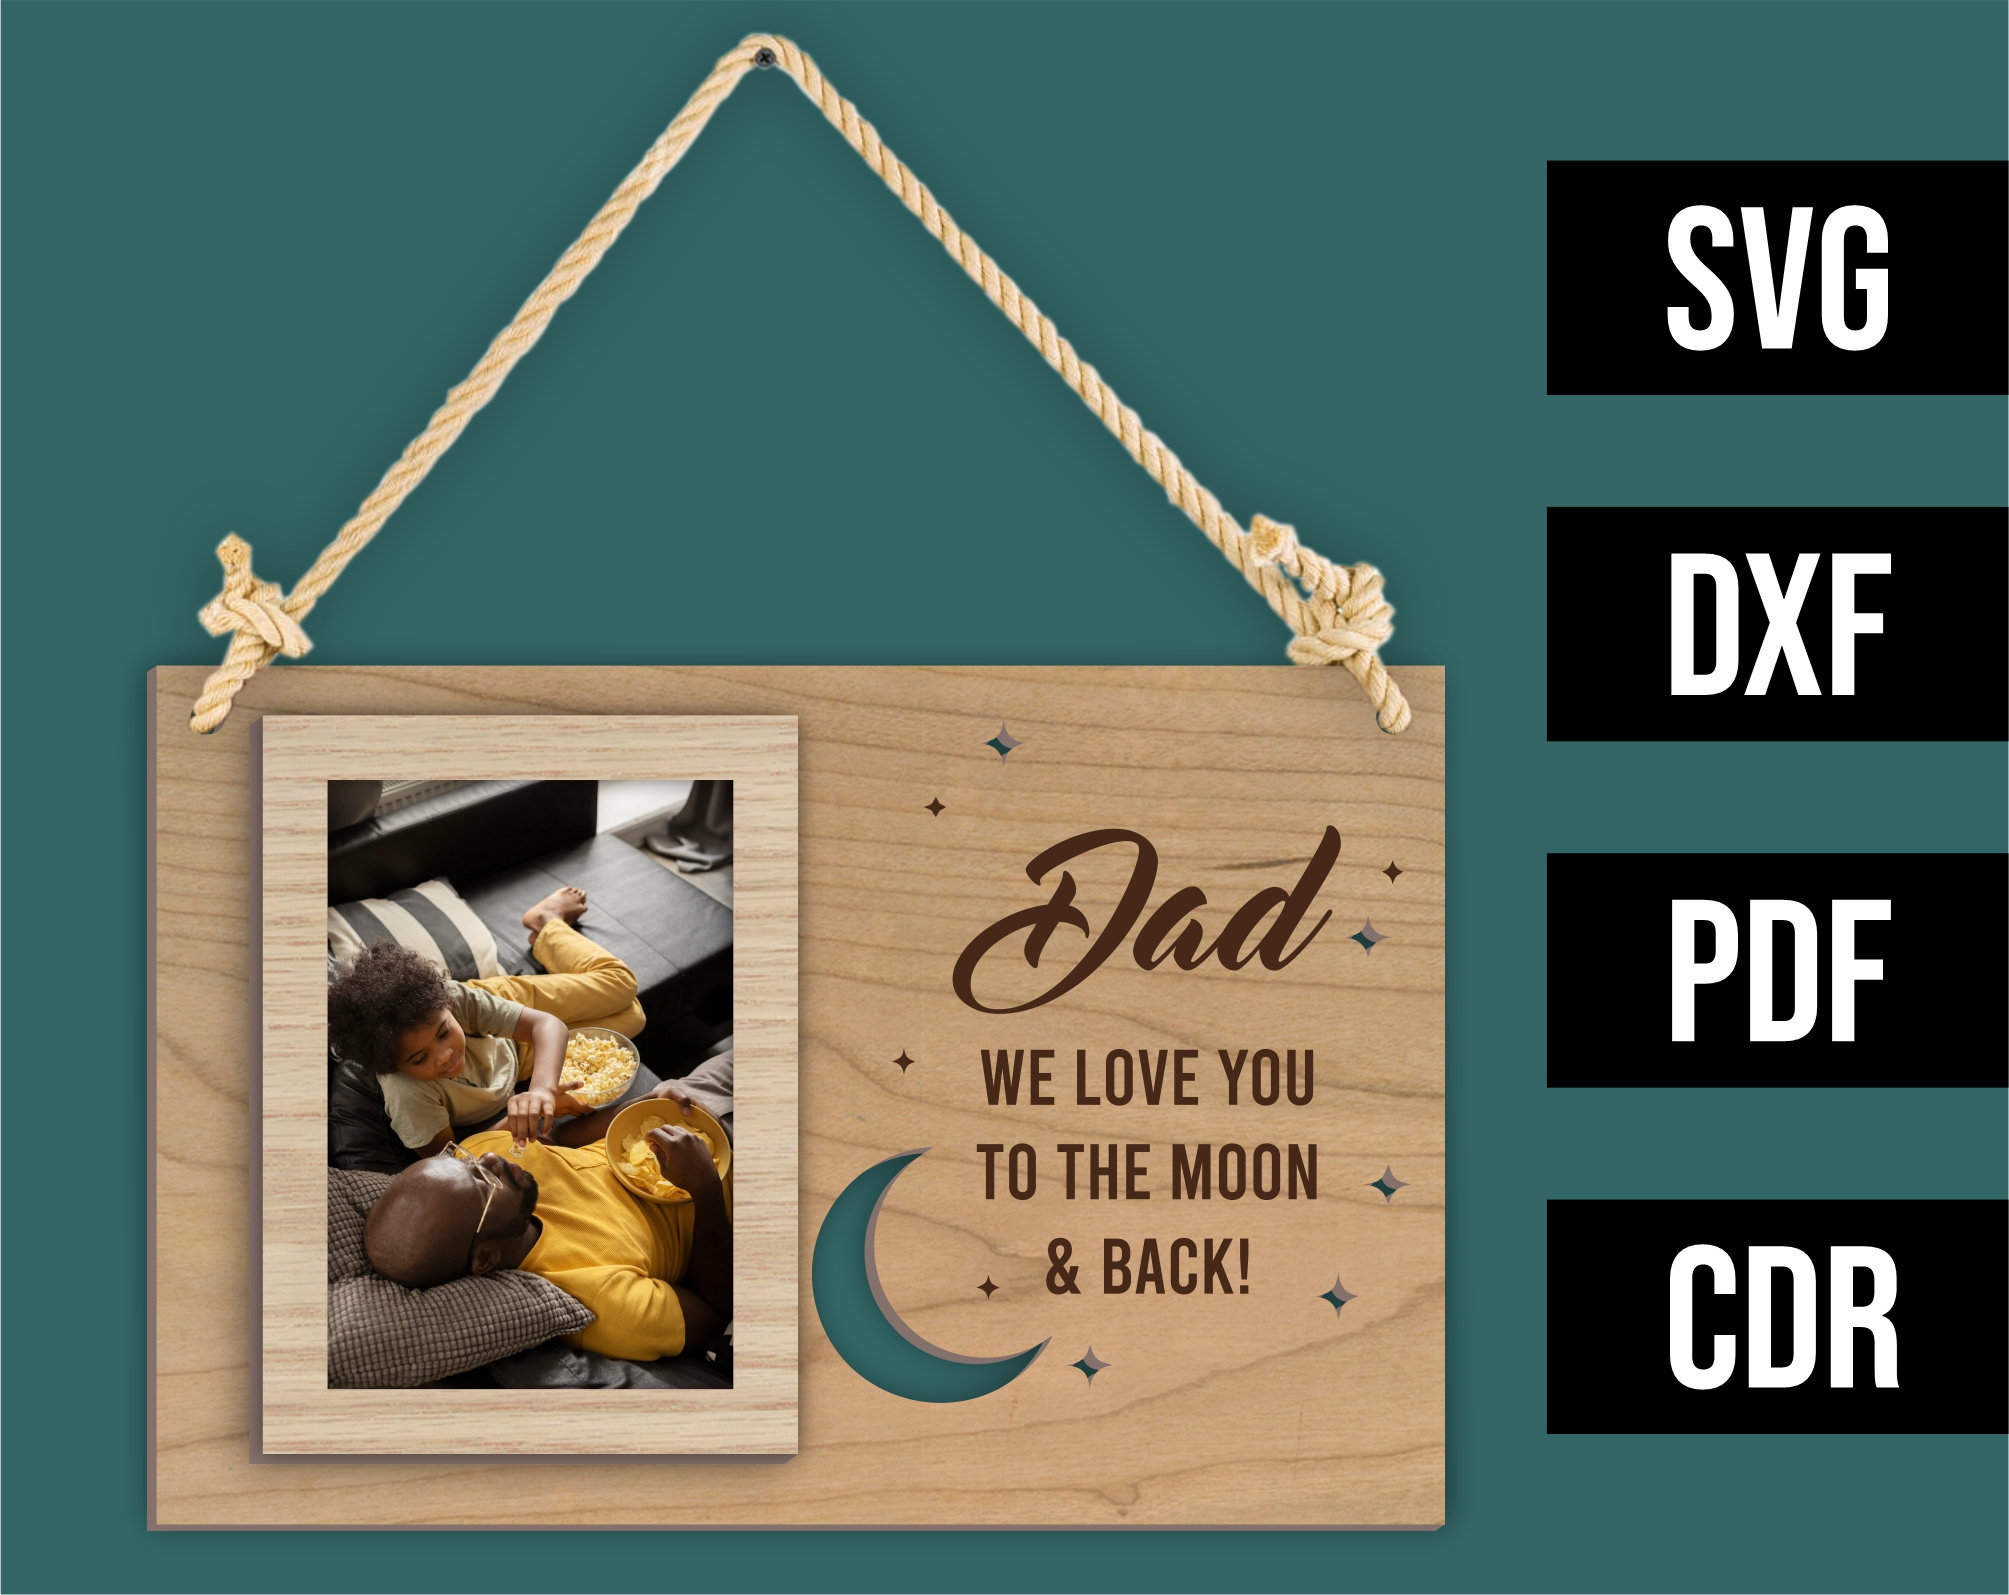 Fathers Day (Lasered Items) – Not Just Frames